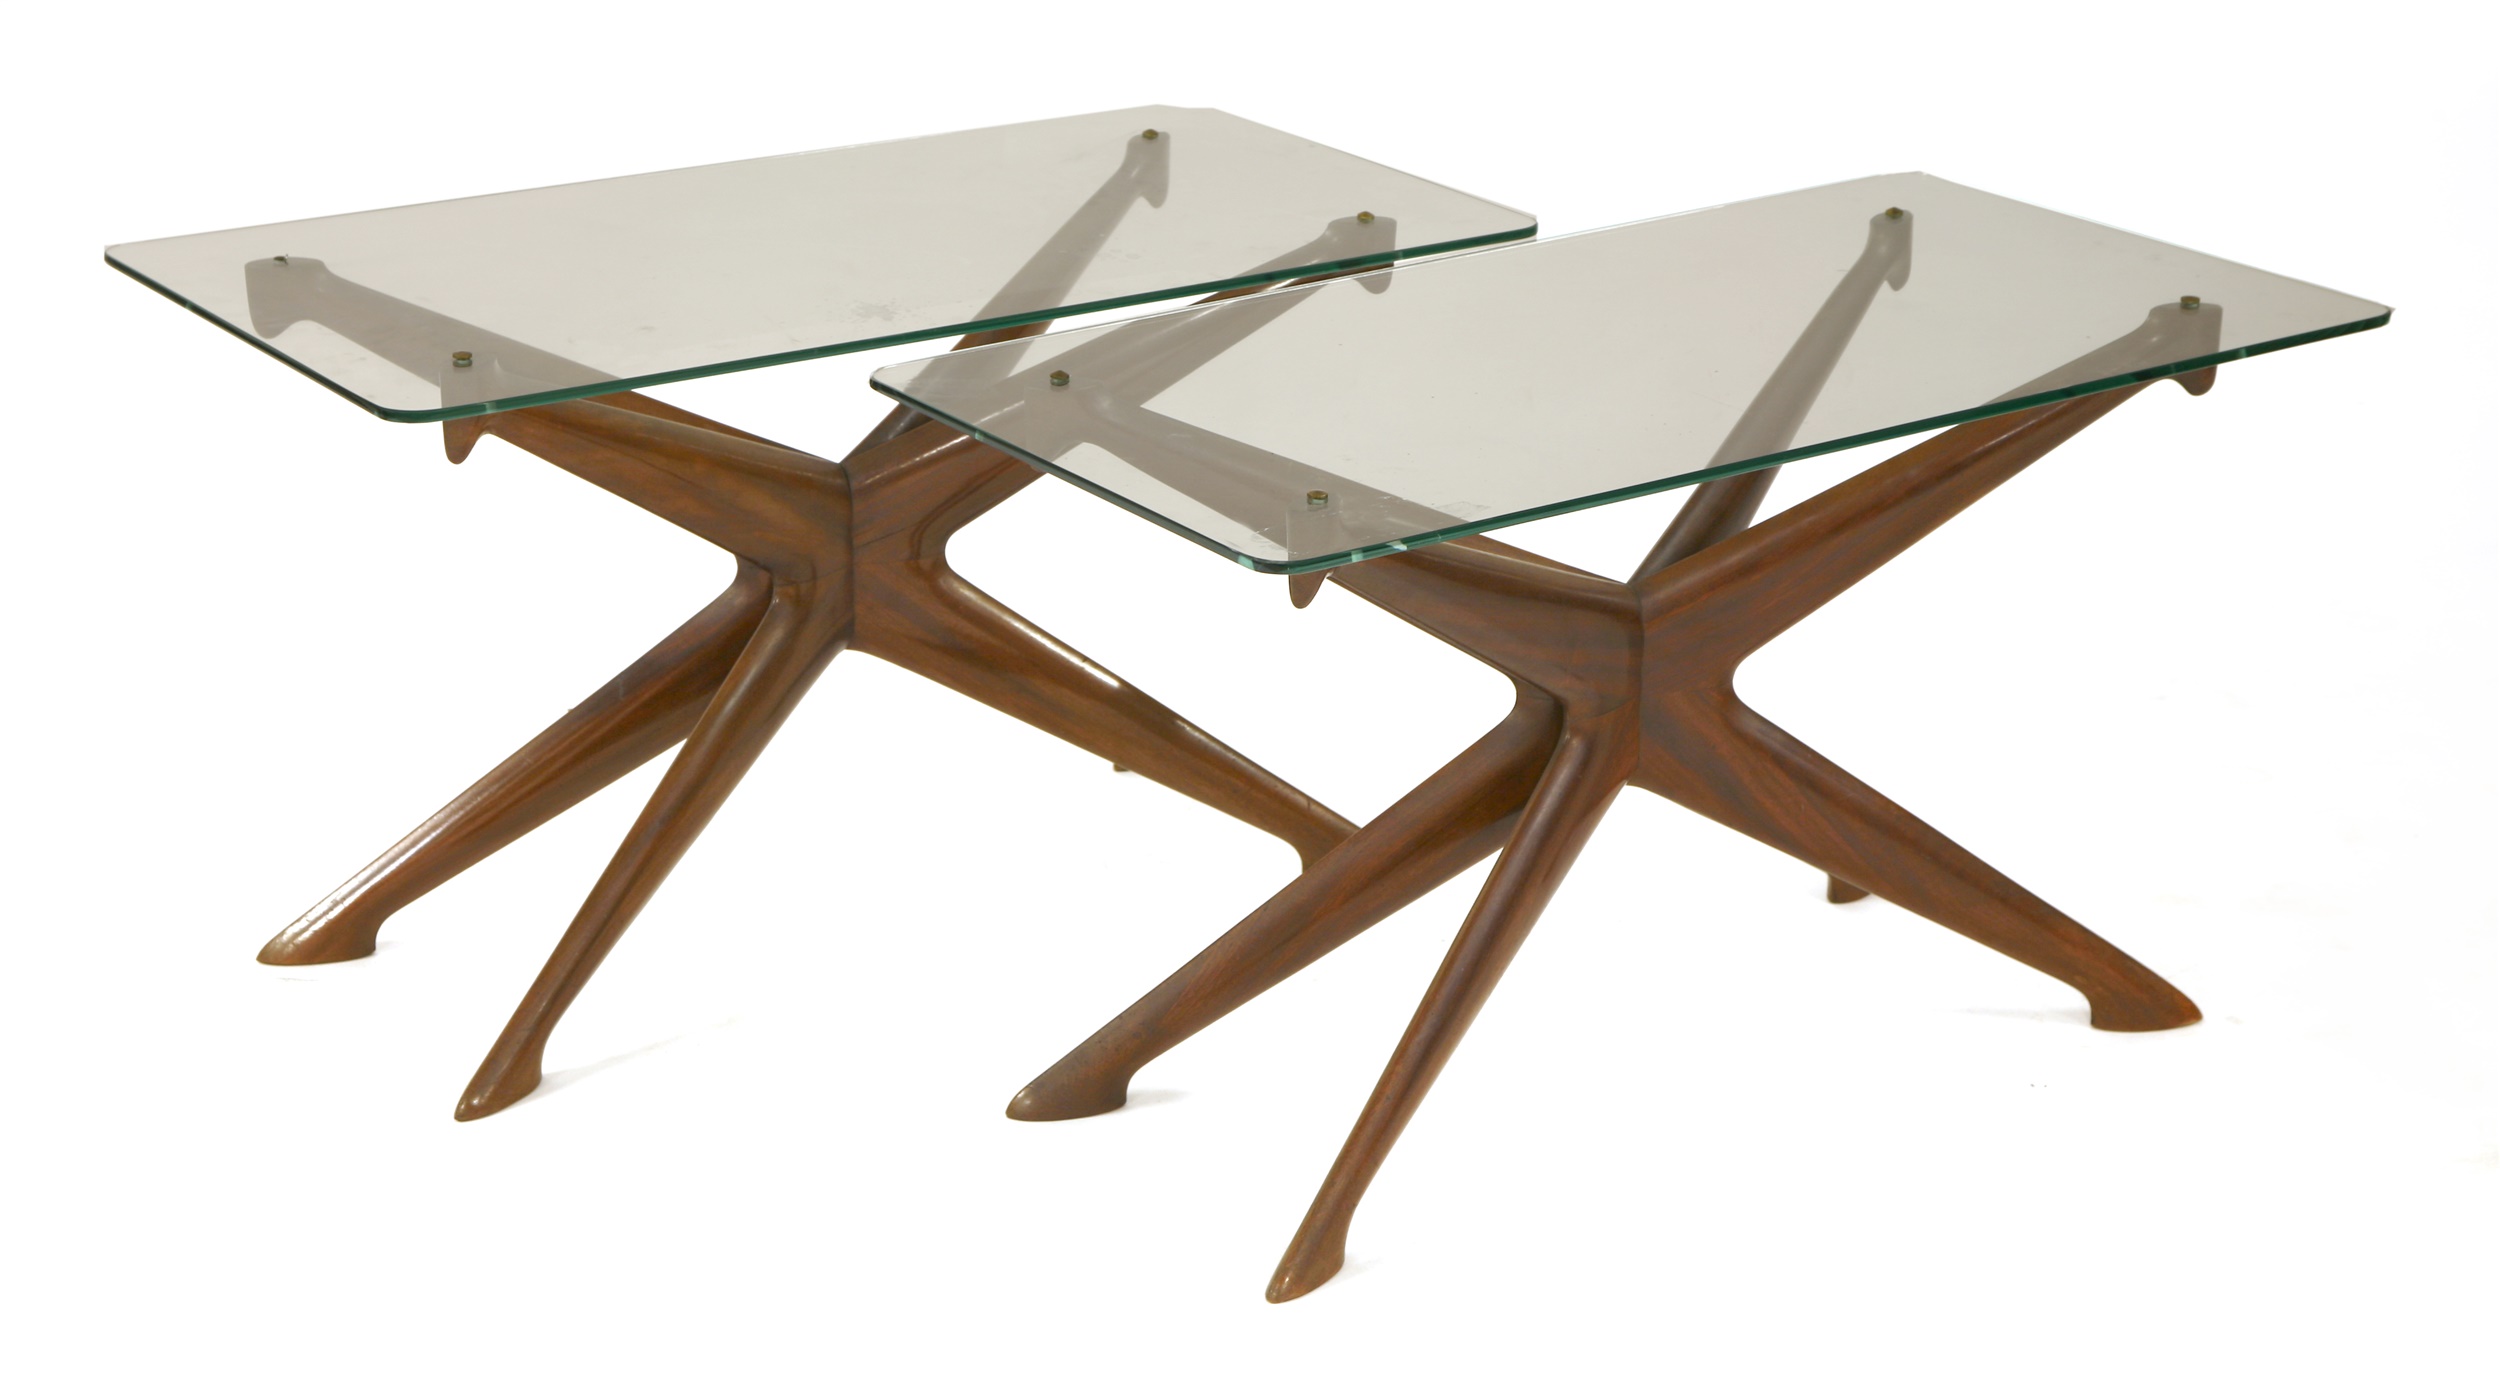 A pair of side tables (£1,800)